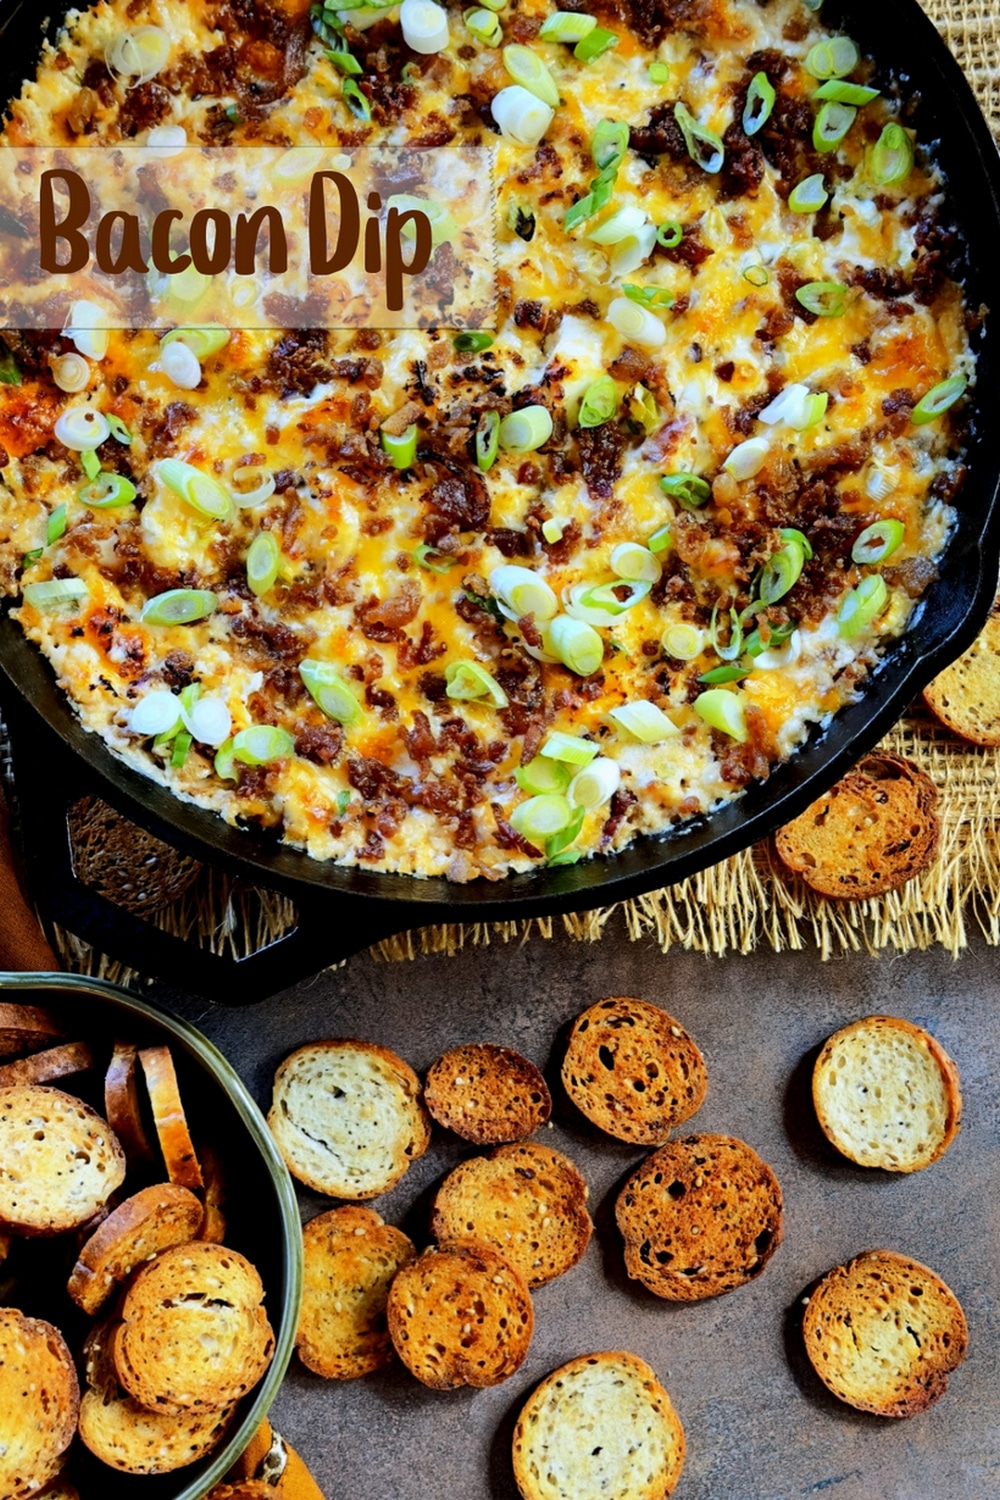 This hearty dip checks all the boxes that make a warm and creamy dip a classic - big flavor, gooey cheese and in this case, smoky bacon. via @cmpollak1